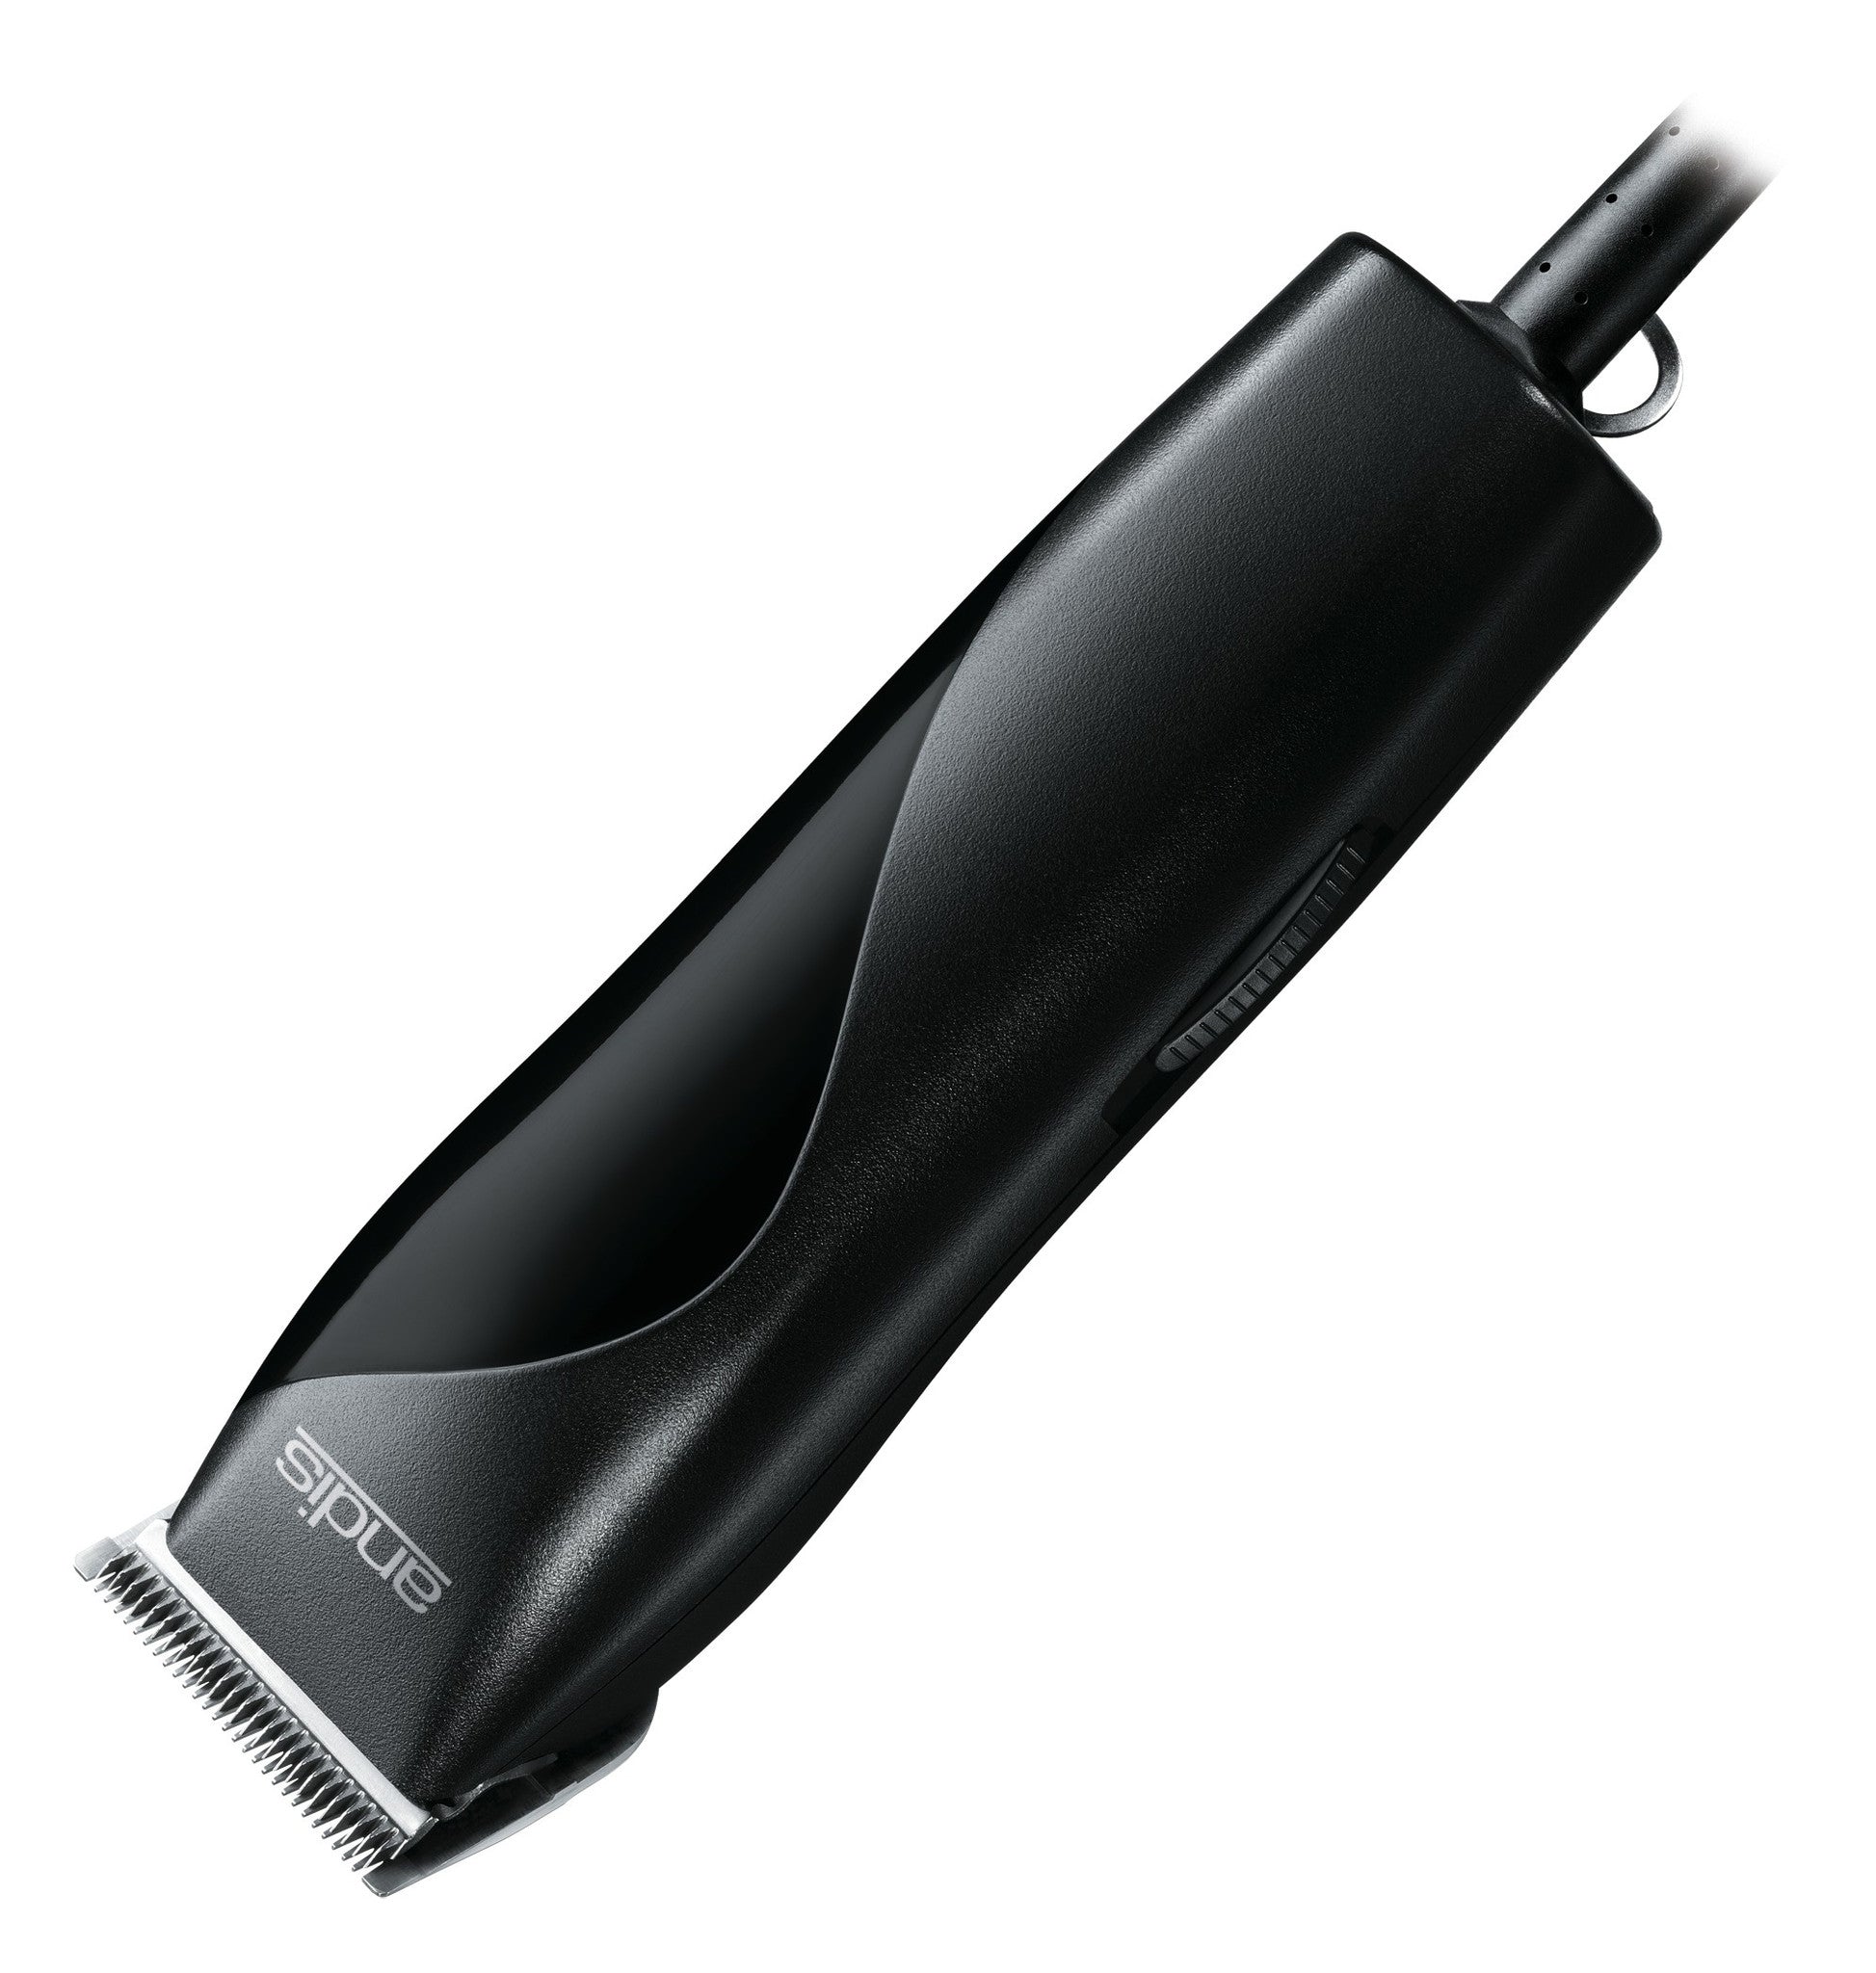 andis mbg 2 clippers